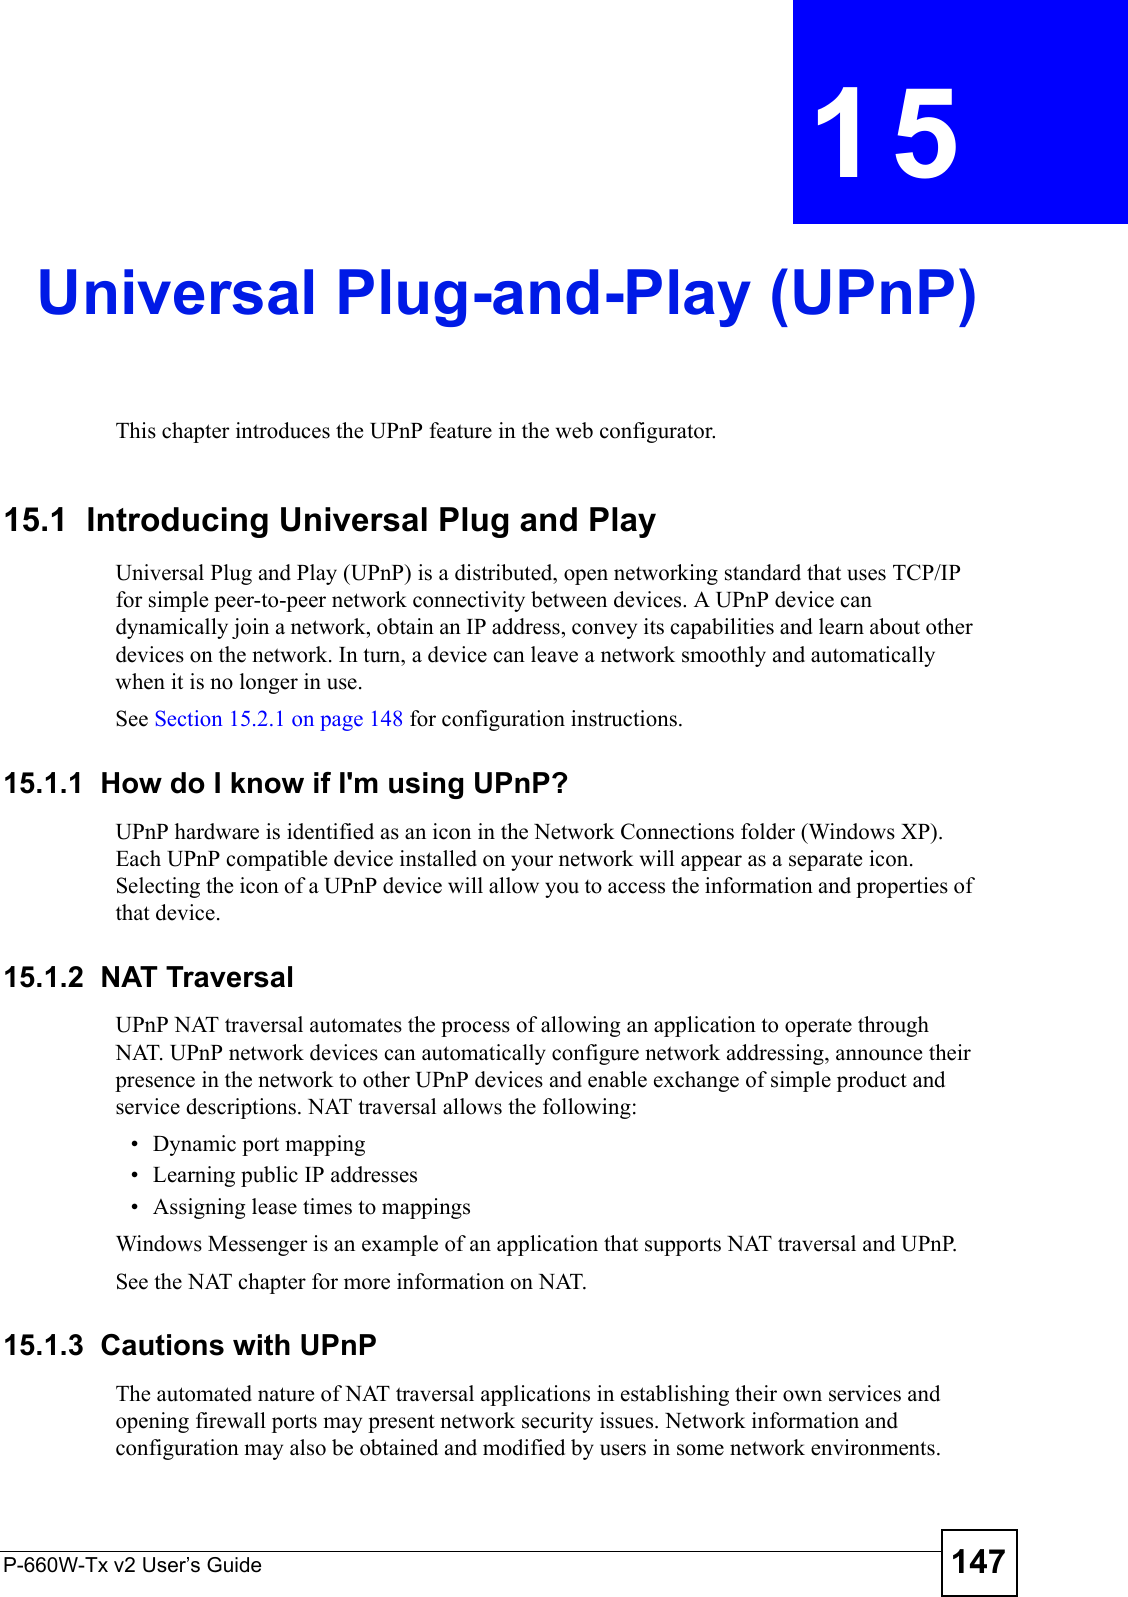 P-660W-Tx v2 User’s Guide 147CHAPTER  15 Universal Plug-and-Play (UPnP)This chapter introduces the UPnP feature in the web configurator.15.1  Introducing Universal Plug and Play Universal Plug and Play (UPnP) is a distributed, open networking standard that uses TCP/IP for simple peer-to-peer network connectivity between devices. A UPnP device can dynamically join a network, obtain an IP address, convey its capabilities and learn about other devices on the network. In turn, a device can leave a network smoothly and automatically when it is no longer in use.See Section 15.2.1 on page 148 for configuration instructions. 15.1.1  How do I know if I&apos;m using UPnP? UPnP hardware is identified as an icon in the Network Connections folder (Windows XP). Each UPnP compatible device installed on your network will appear as a separate icon. Selecting the icon of a UPnP device will allow you to access the information and properties of that device. 15.1.2  NAT TraversalUPnP NAT traversal automates the process of allowing an application to operate through NAT. UPnP network devices can automatically configure network addressing, announce their presence in the network to other UPnP devices and enable exchange of simple product and service descriptions. NAT traversal allows the following:• Dynamic port mapping• Learning public IP addresses• Assigning lease times to mappingsWindows Messenger is an example of an application that supports NAT traversal and UPnP. See the NAT chapter for more information on NAT.15.1.3  Cautions with UPnPThe automated nature of NAT traversal applications in establishing their own services and opening firewall ports may present network security issues. Network information and configuration may also be obtained and modified by users in some network environments. 